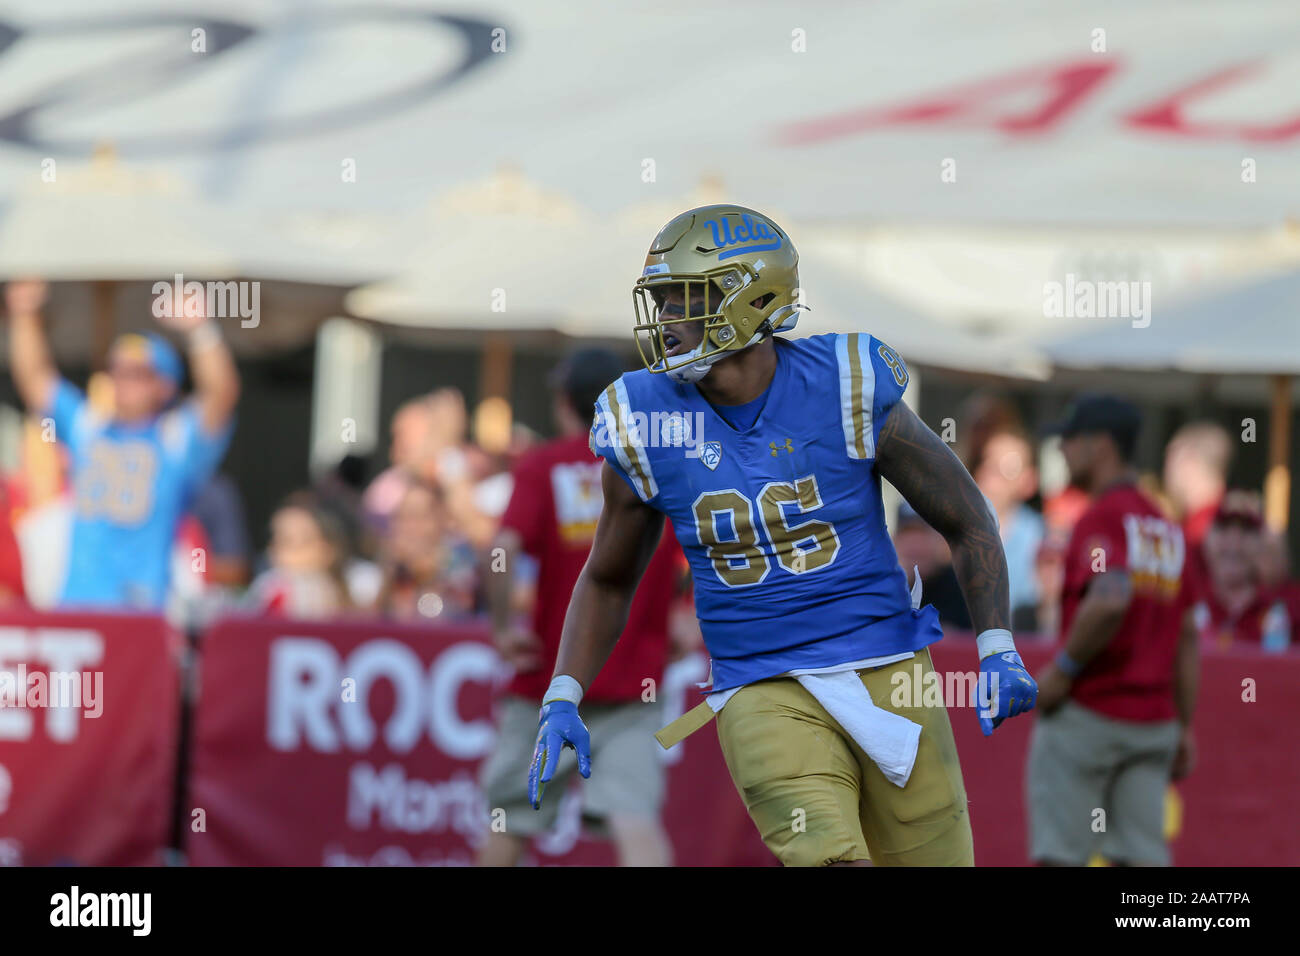 UCLA Bruins tight end Devin Asiasi (86) after scoring a touchdown during the UCLA Bruins vs USC Trojans football game at United Airlines Field at the Los Angeles Memorial Coliseum on Saturday November 23, 2019 (Photo by Jevone Moore) Stock Photo